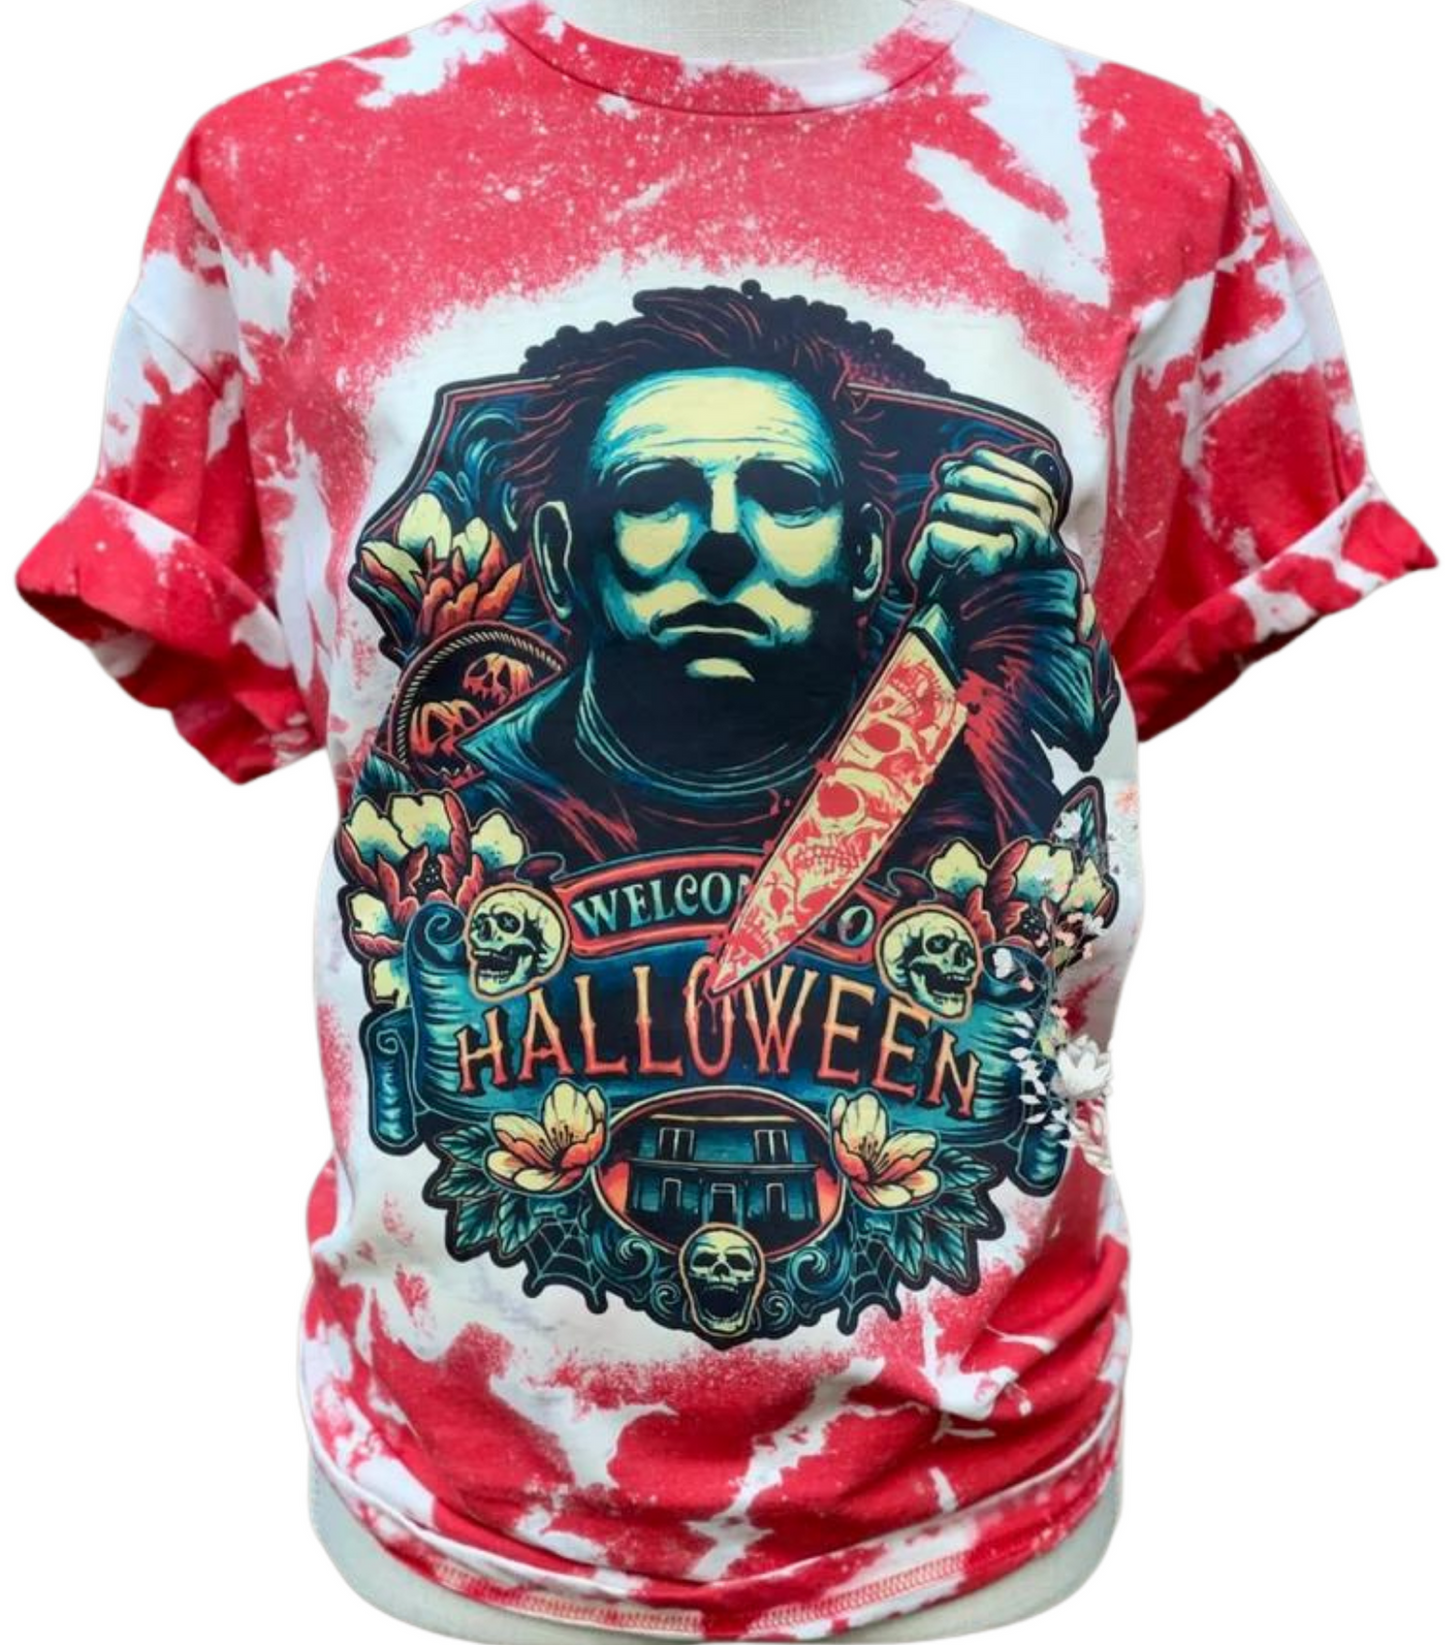 Welcome to Halloween Myers style bleached tee